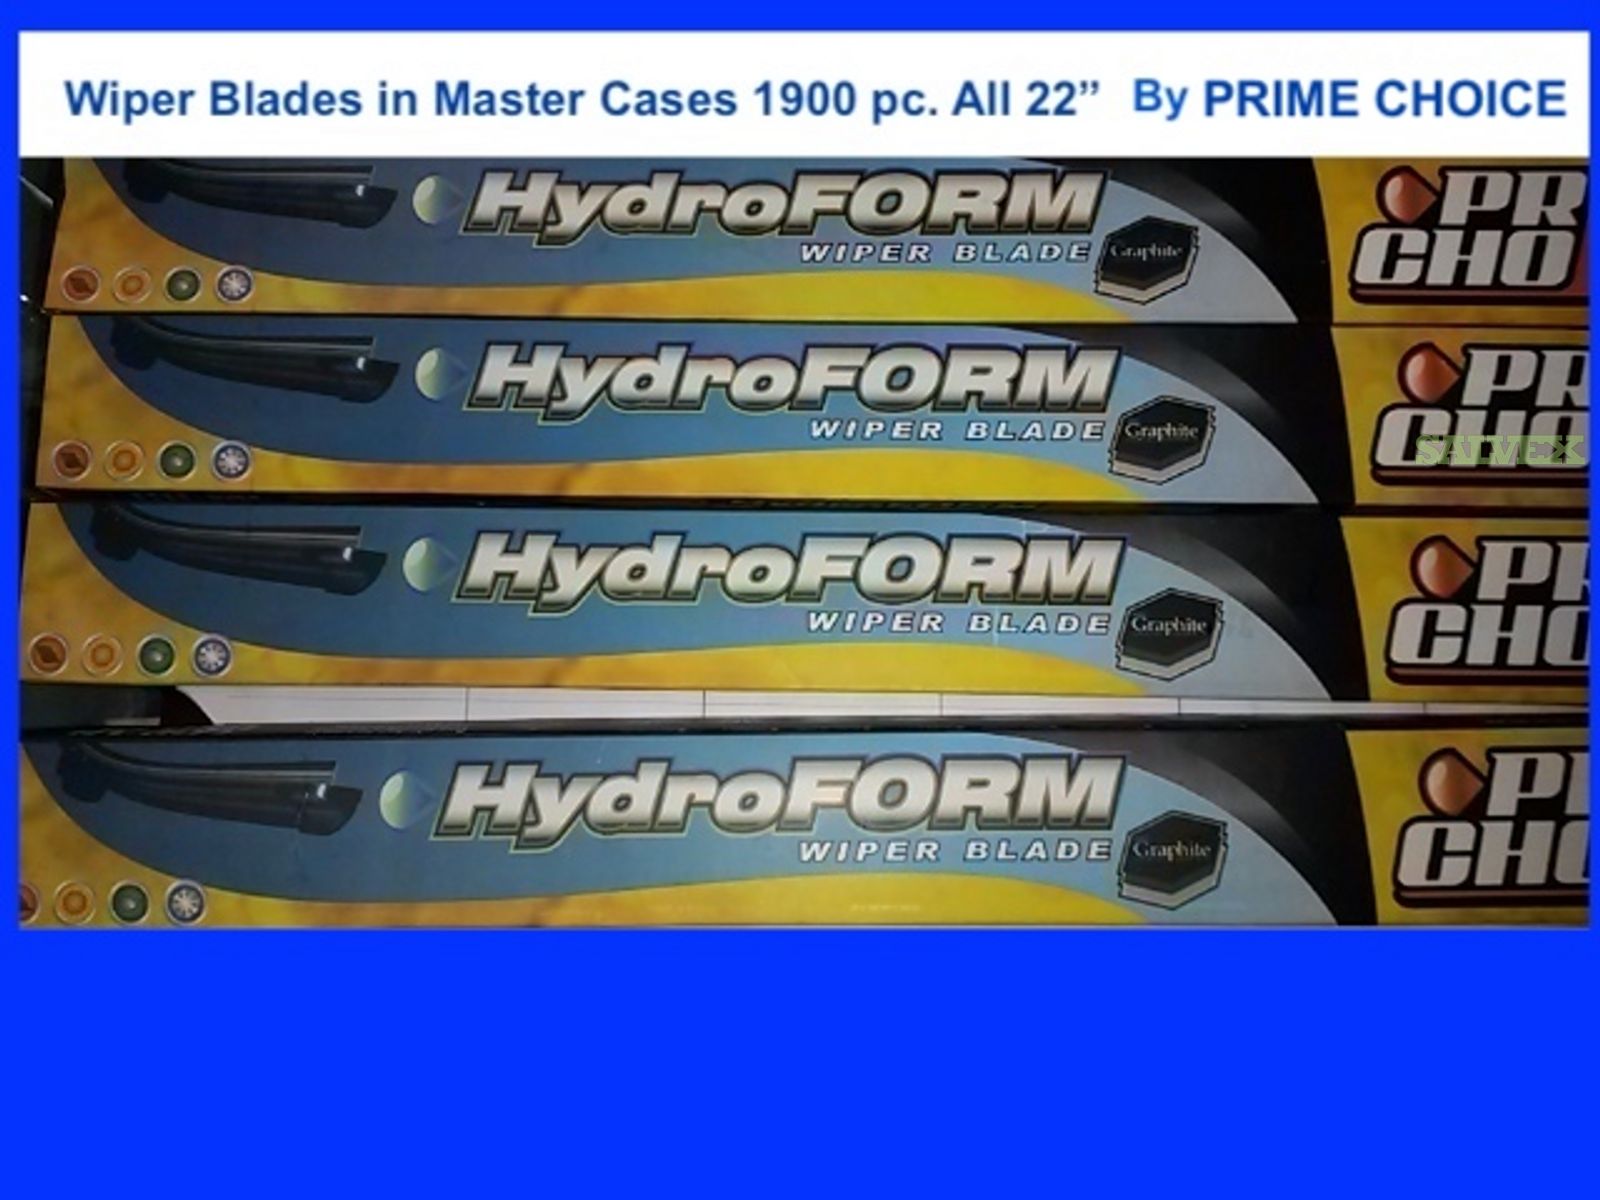 Wiper Blades in Master Cases All 22'' by Prime Choice (1900 Pcs)